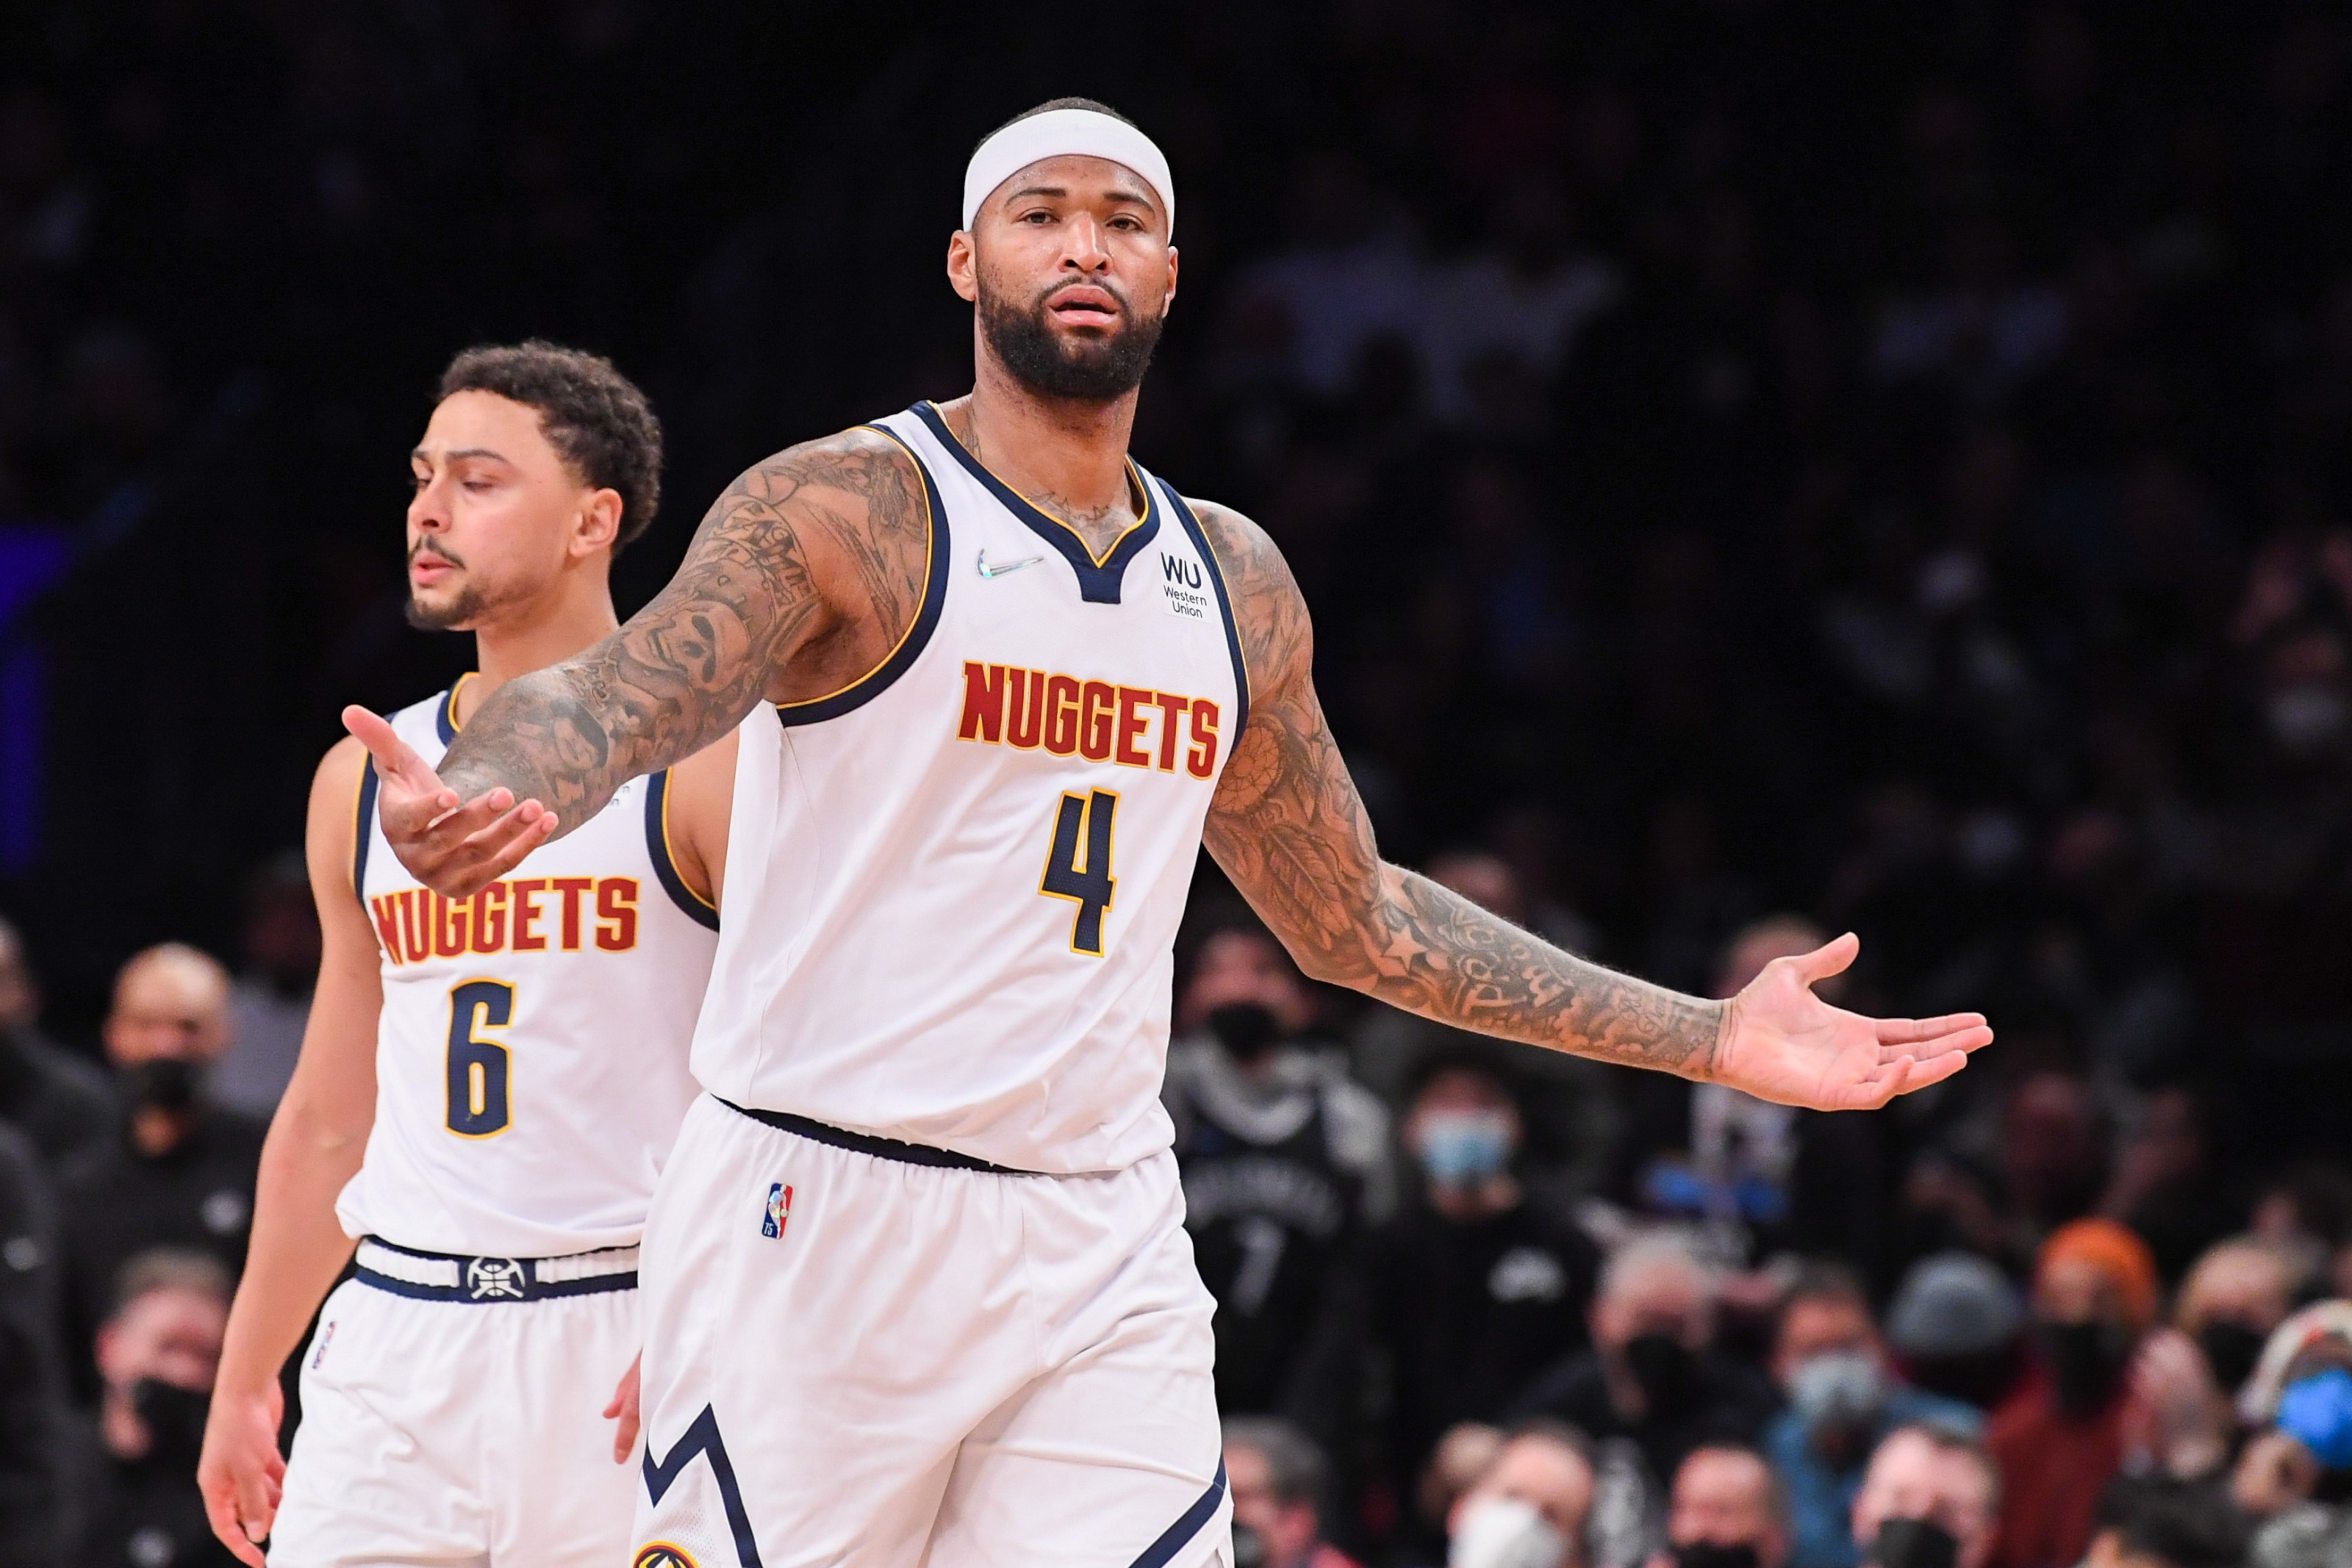 DeMarcus Cousins Finally Gets a Chance to Be the Best Boogie He Can Be